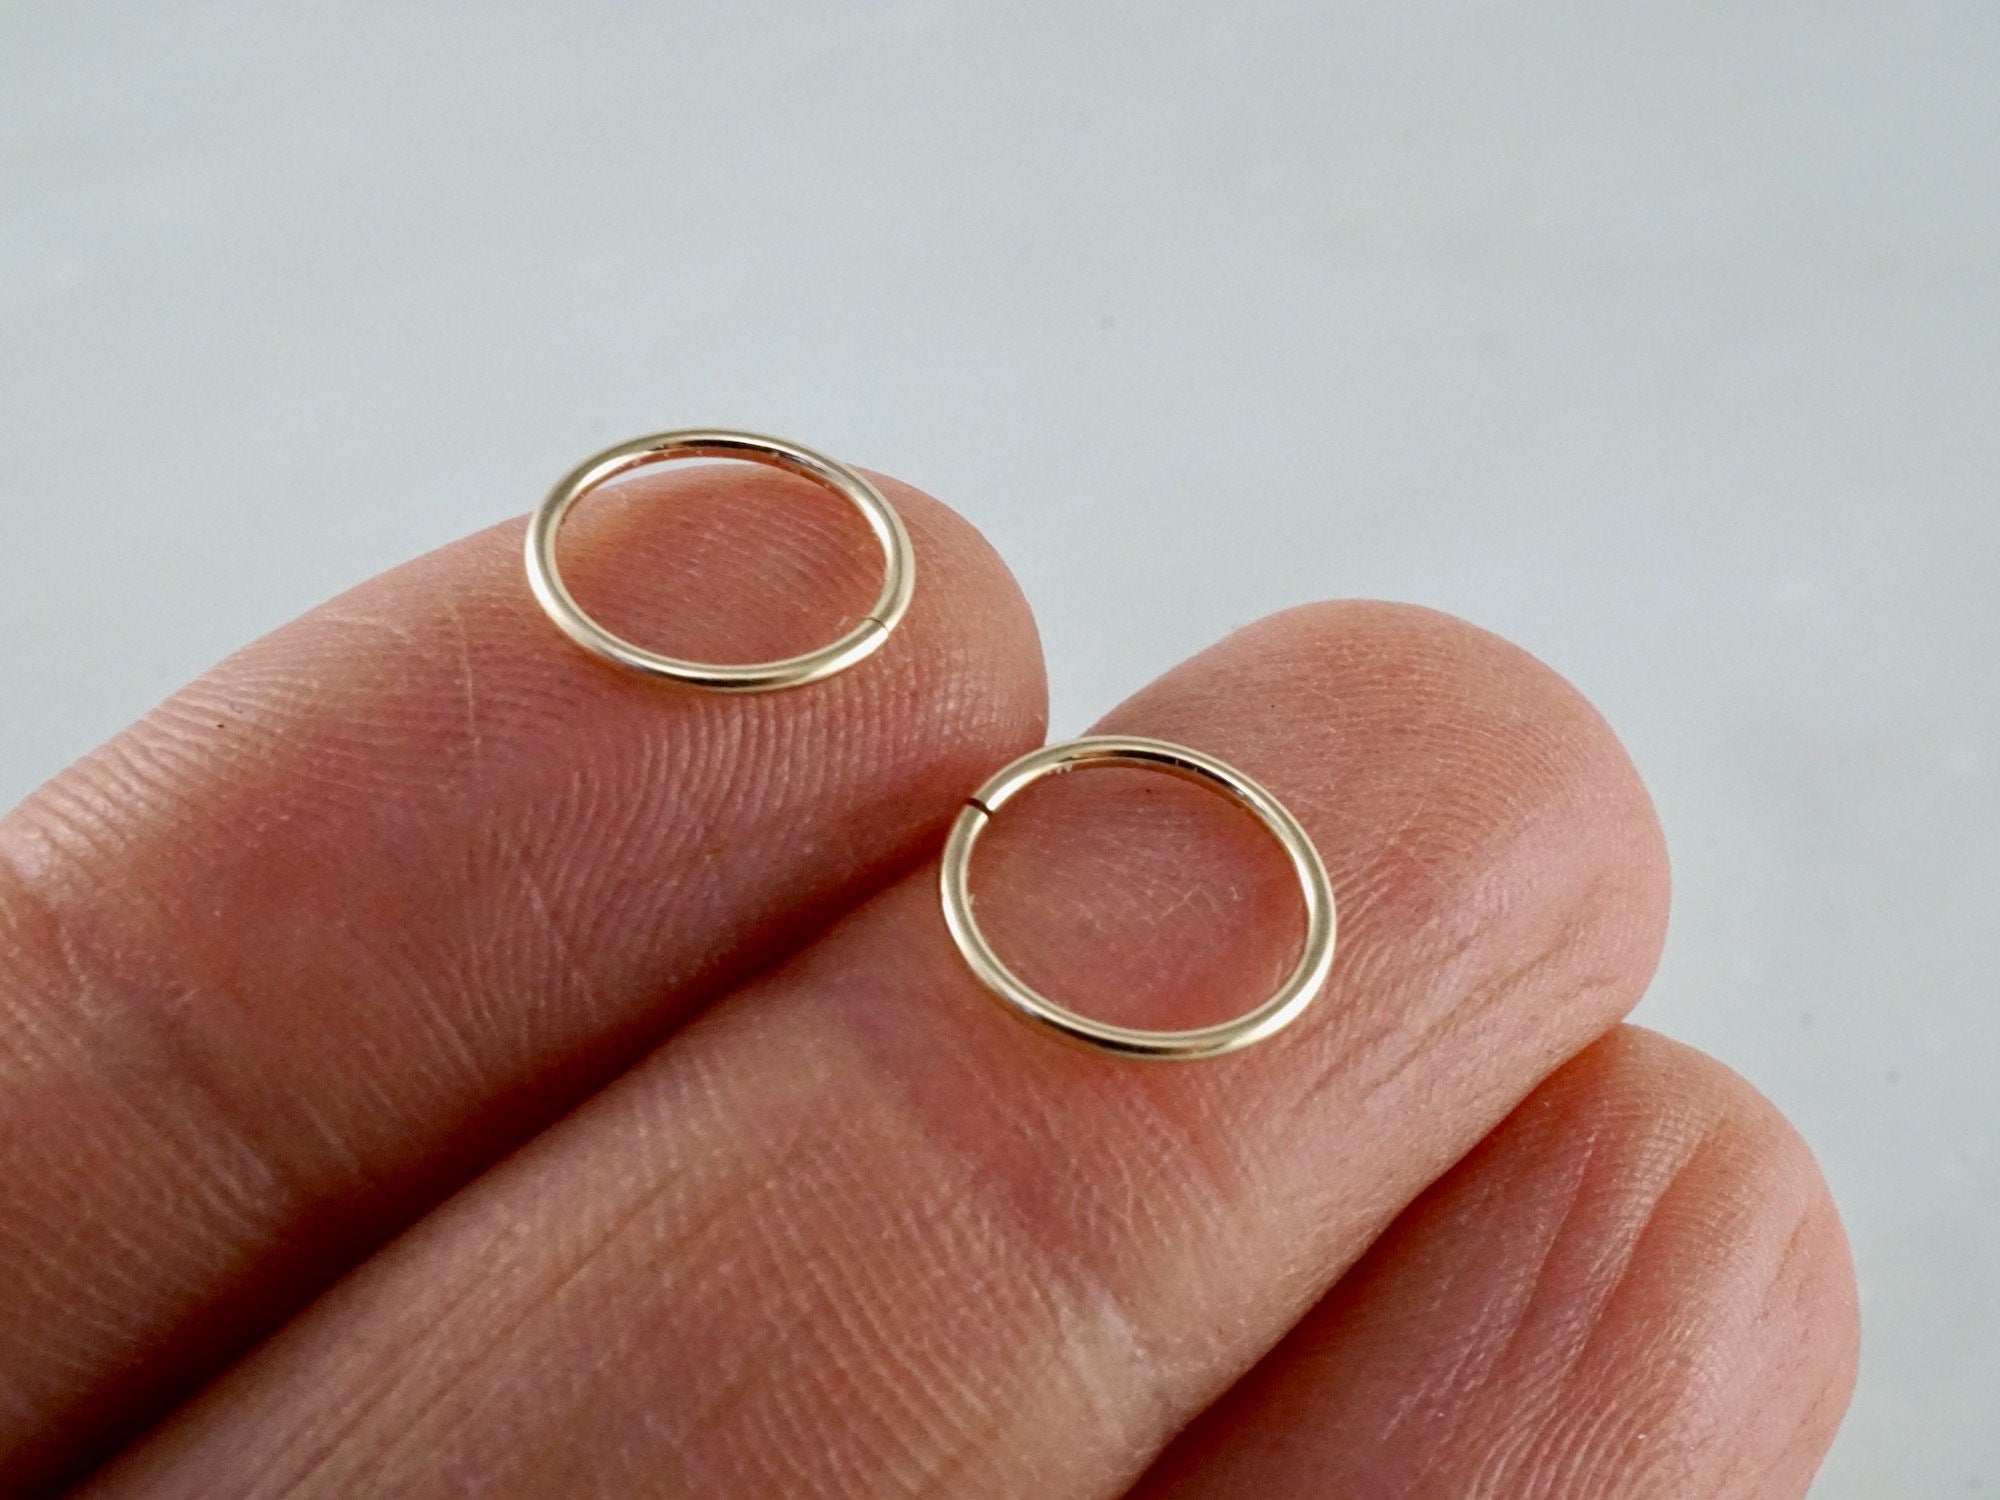 14K Gold Filled Mini Hoops - Two Sets of Earrings  | 20g Small Gold Silver Hoops | Sleepers | Nose Rings | Cartilage Hoops